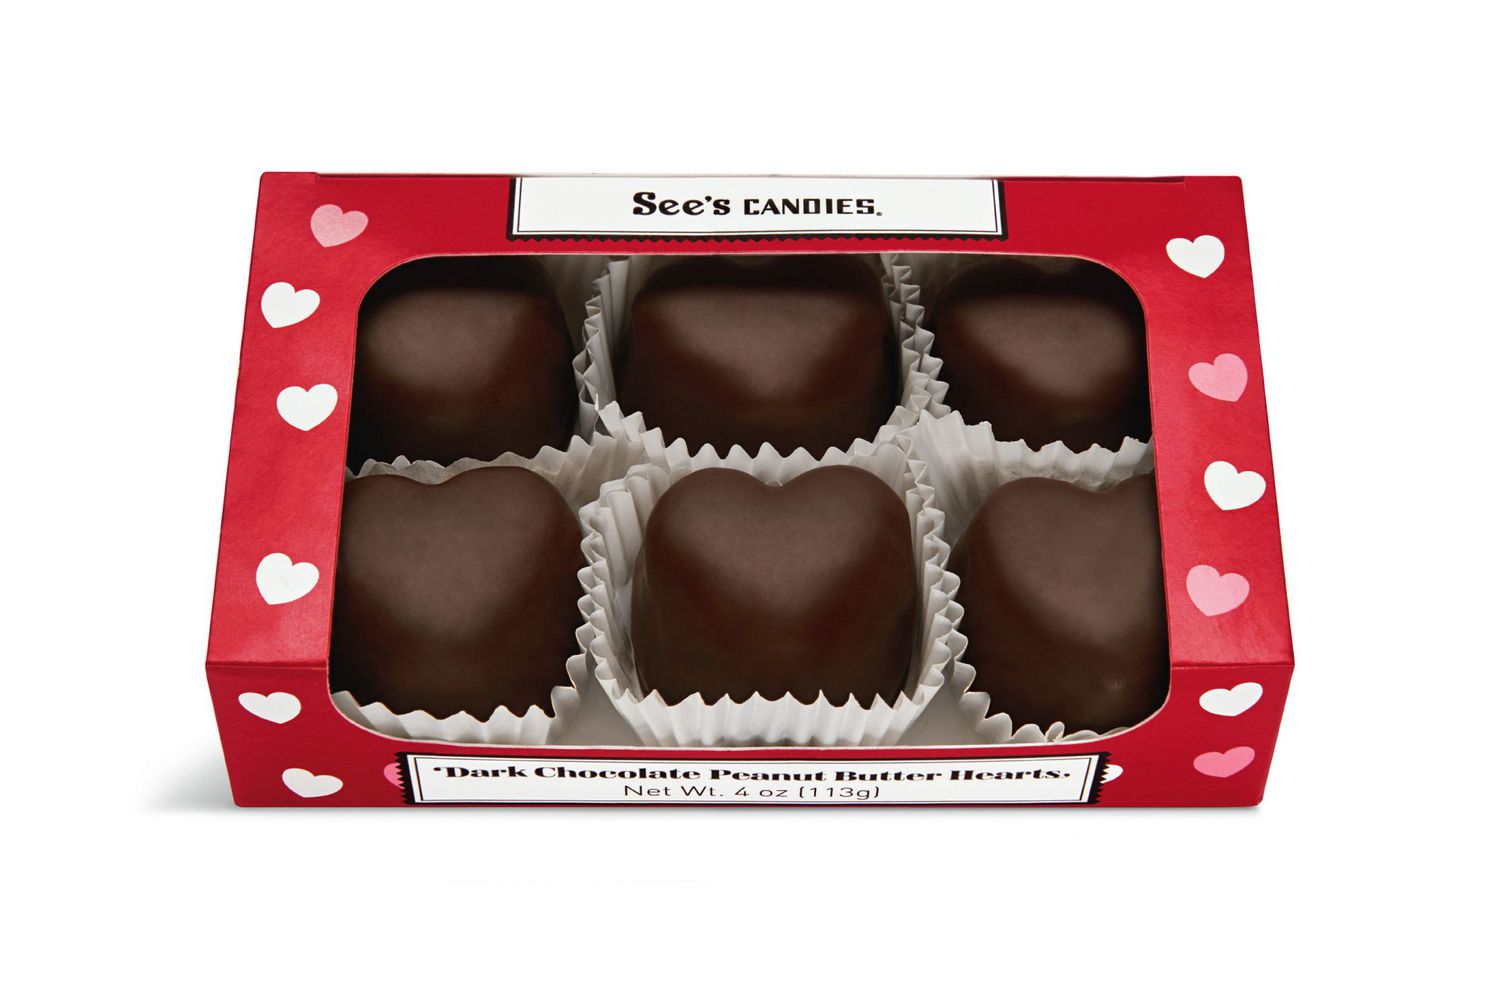 Edible Gifts for Valentine's Day